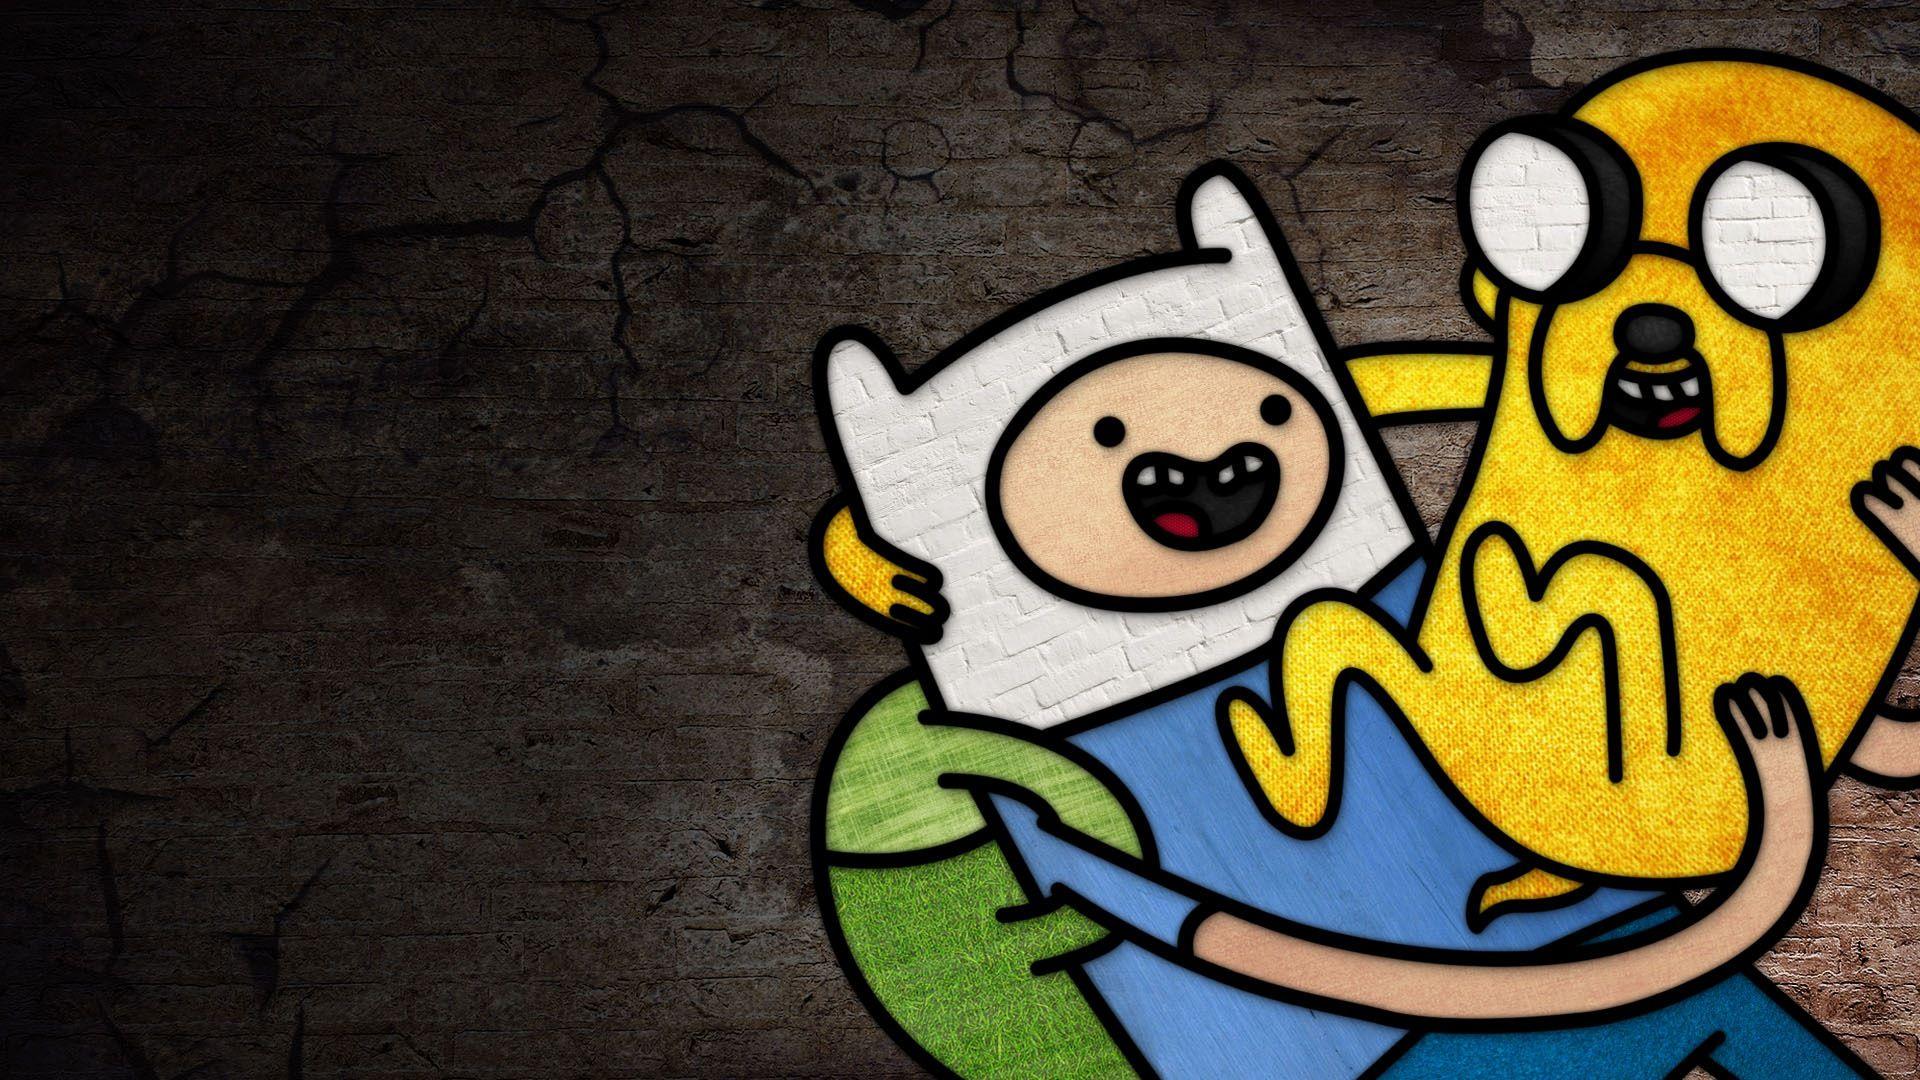 Adventure time for steam фото 85